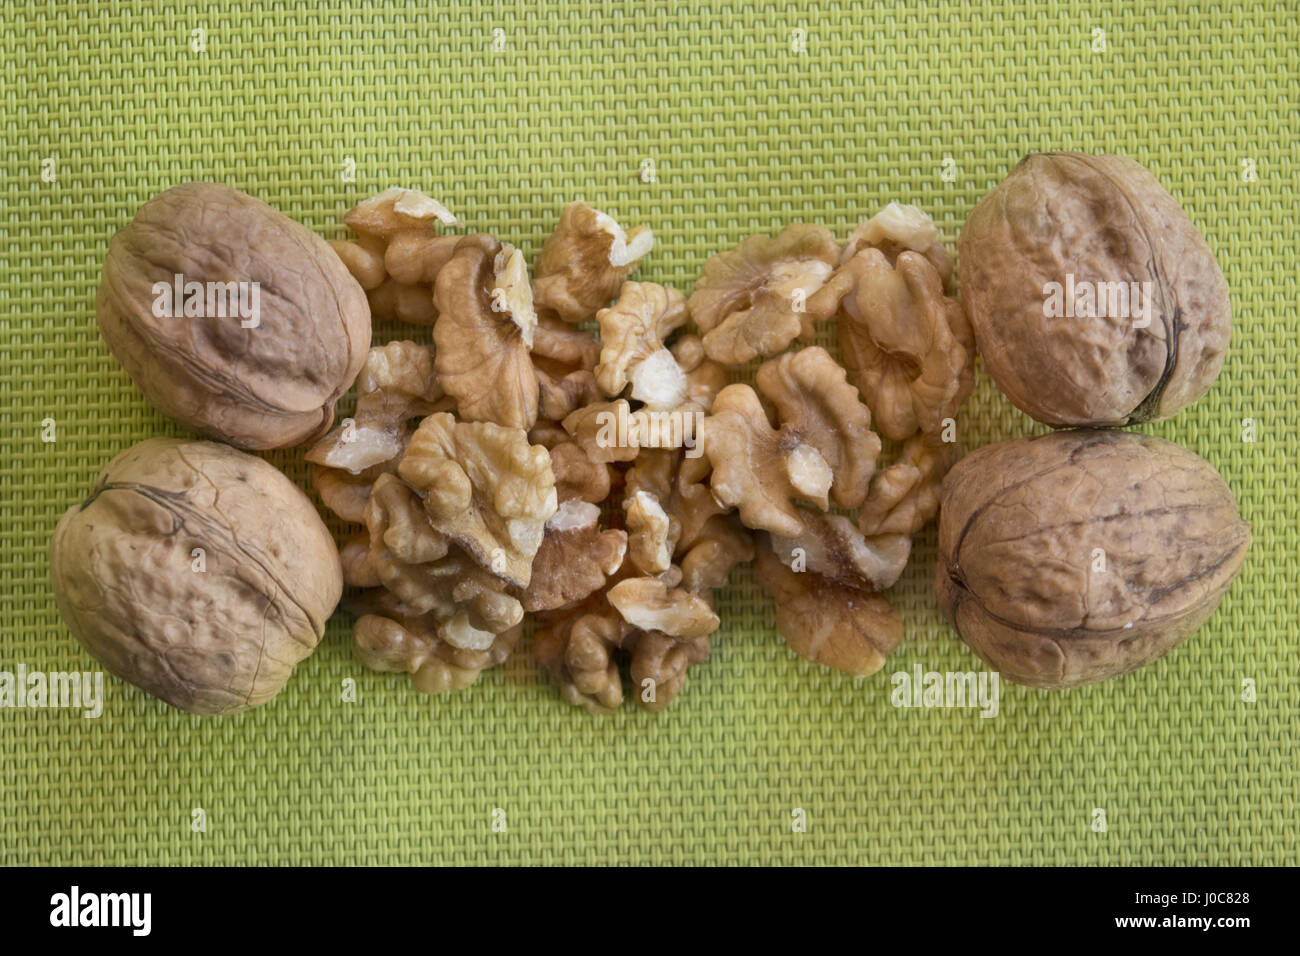 detail of kernel and whole walnuts Stock Photo